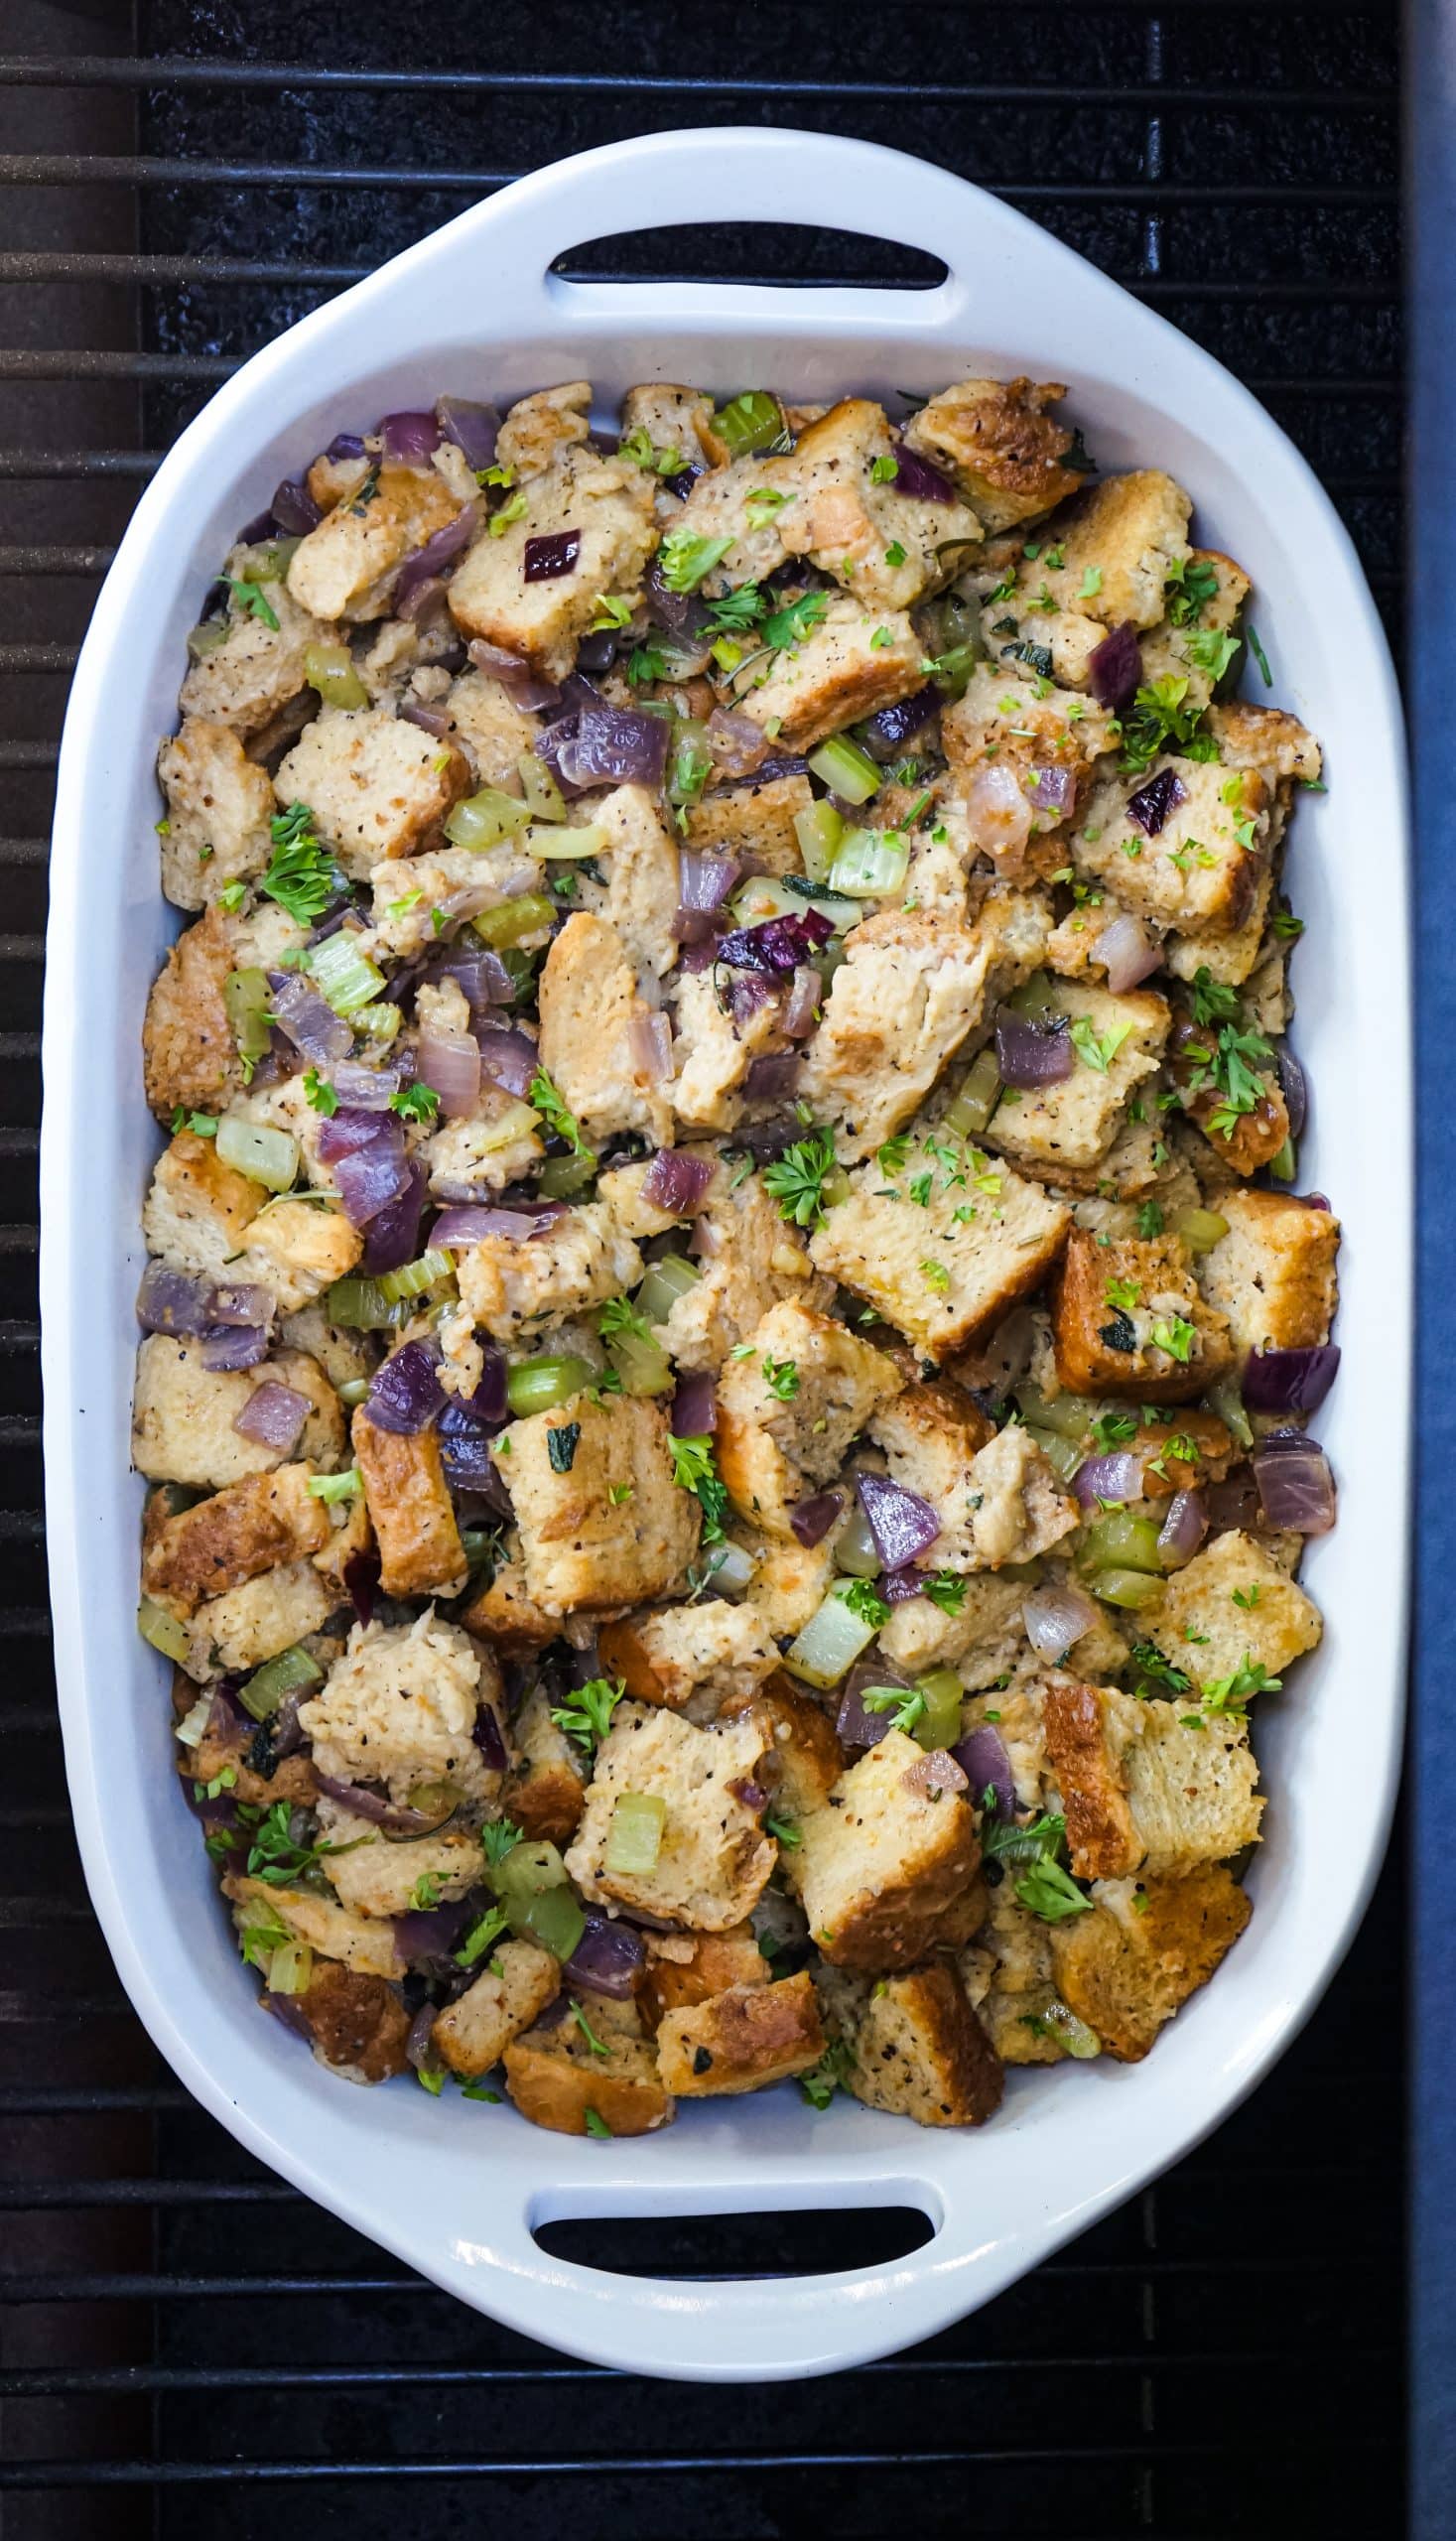 smoked stuffing recipe in a white baking dish on the grates of a grill